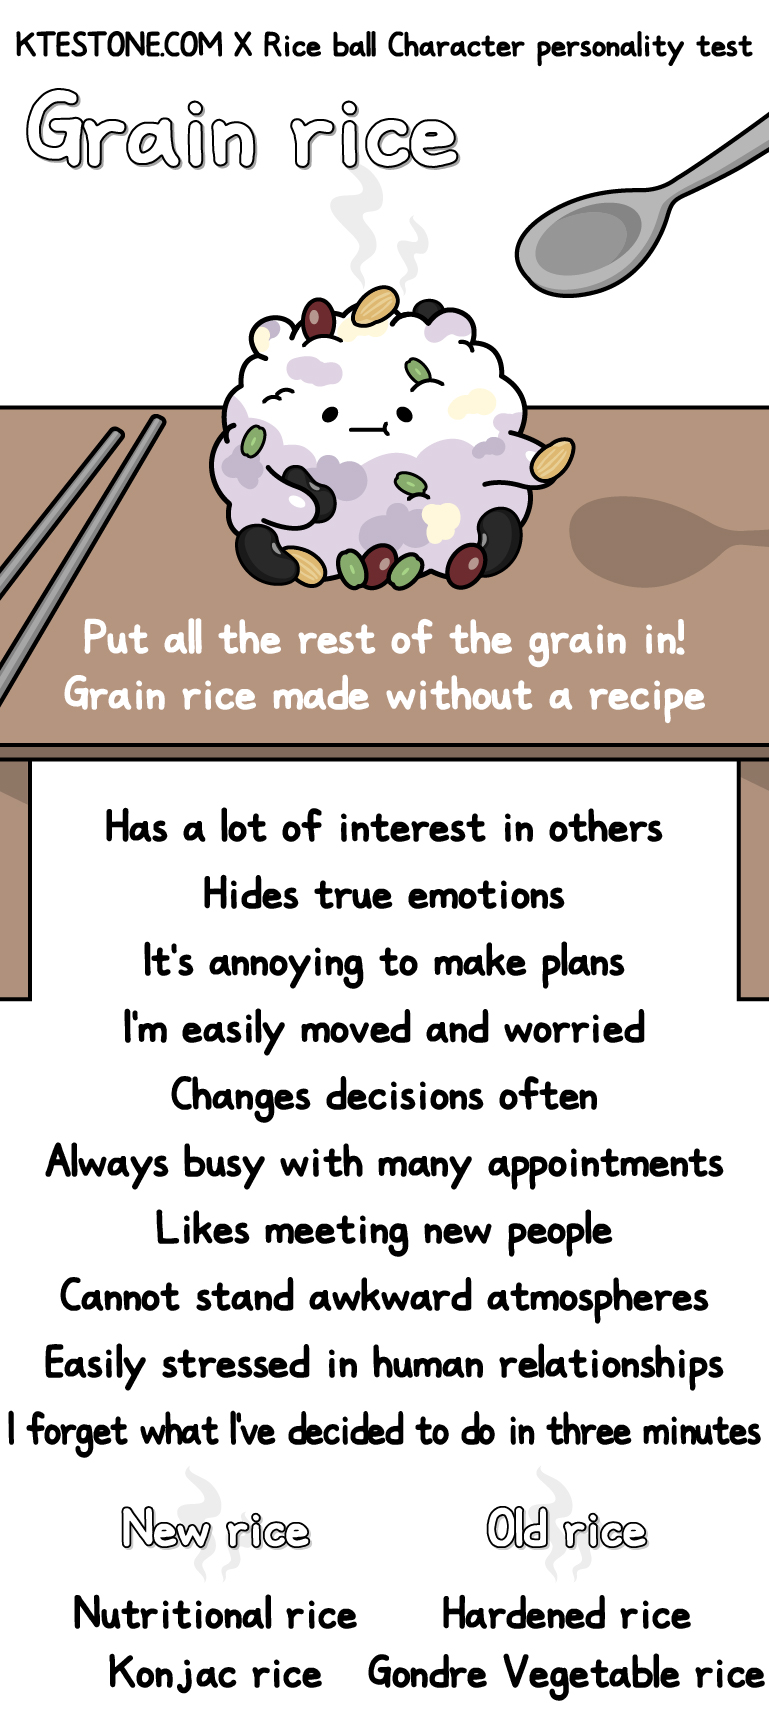 your rice ball characcter personality is…grain rice